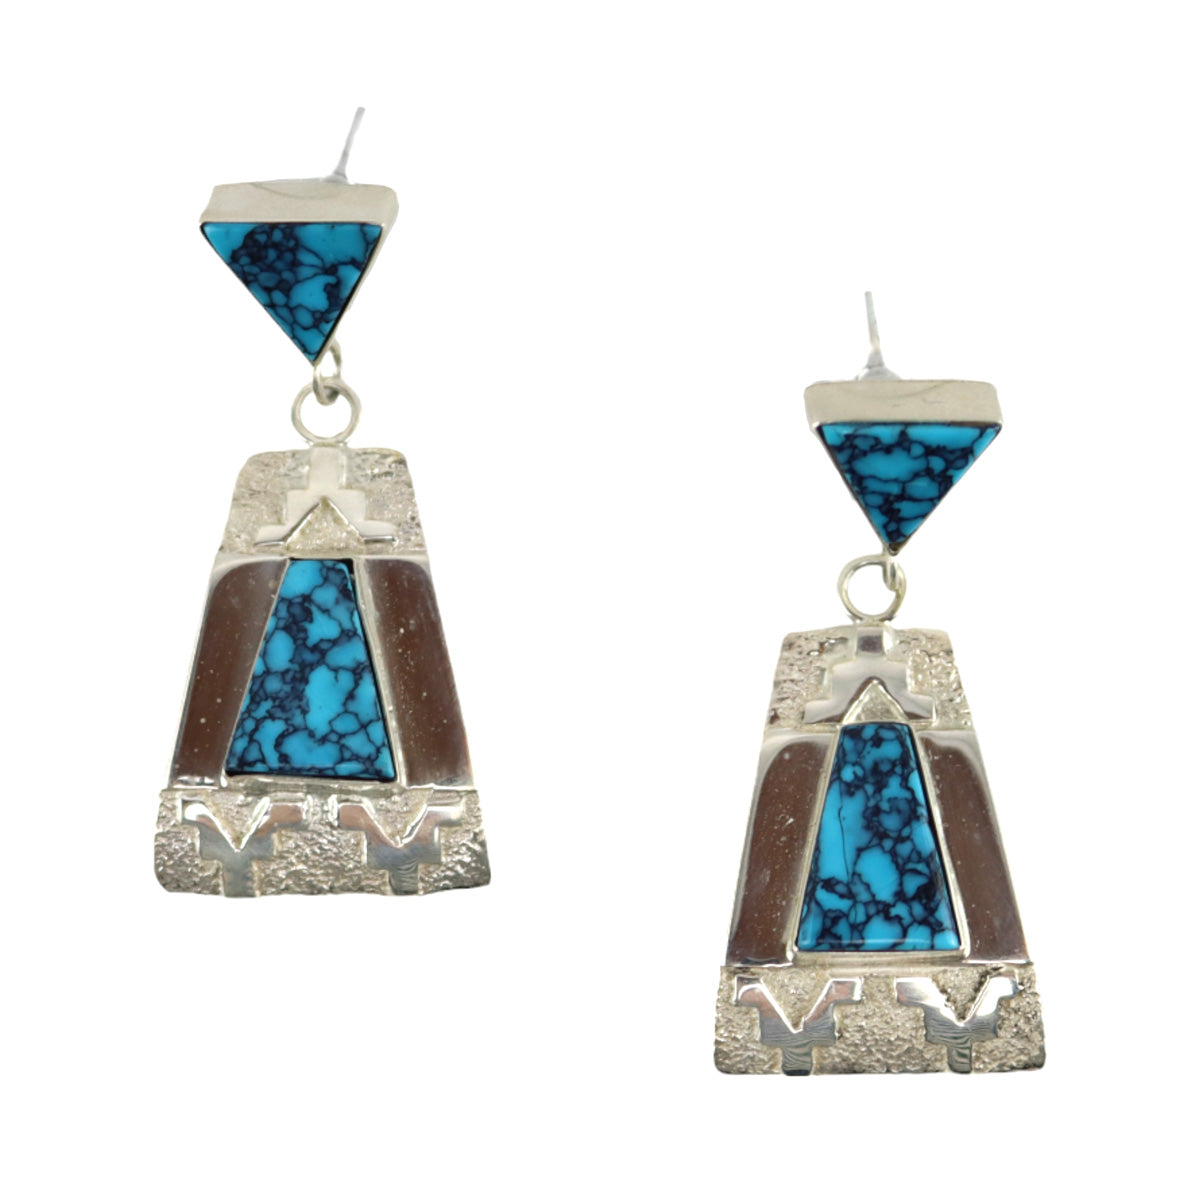 Abraham Begay - Navajo - Contemporary Turquoise and Sterling Silver Post Earrings, 1.75" x 1" (J16079)